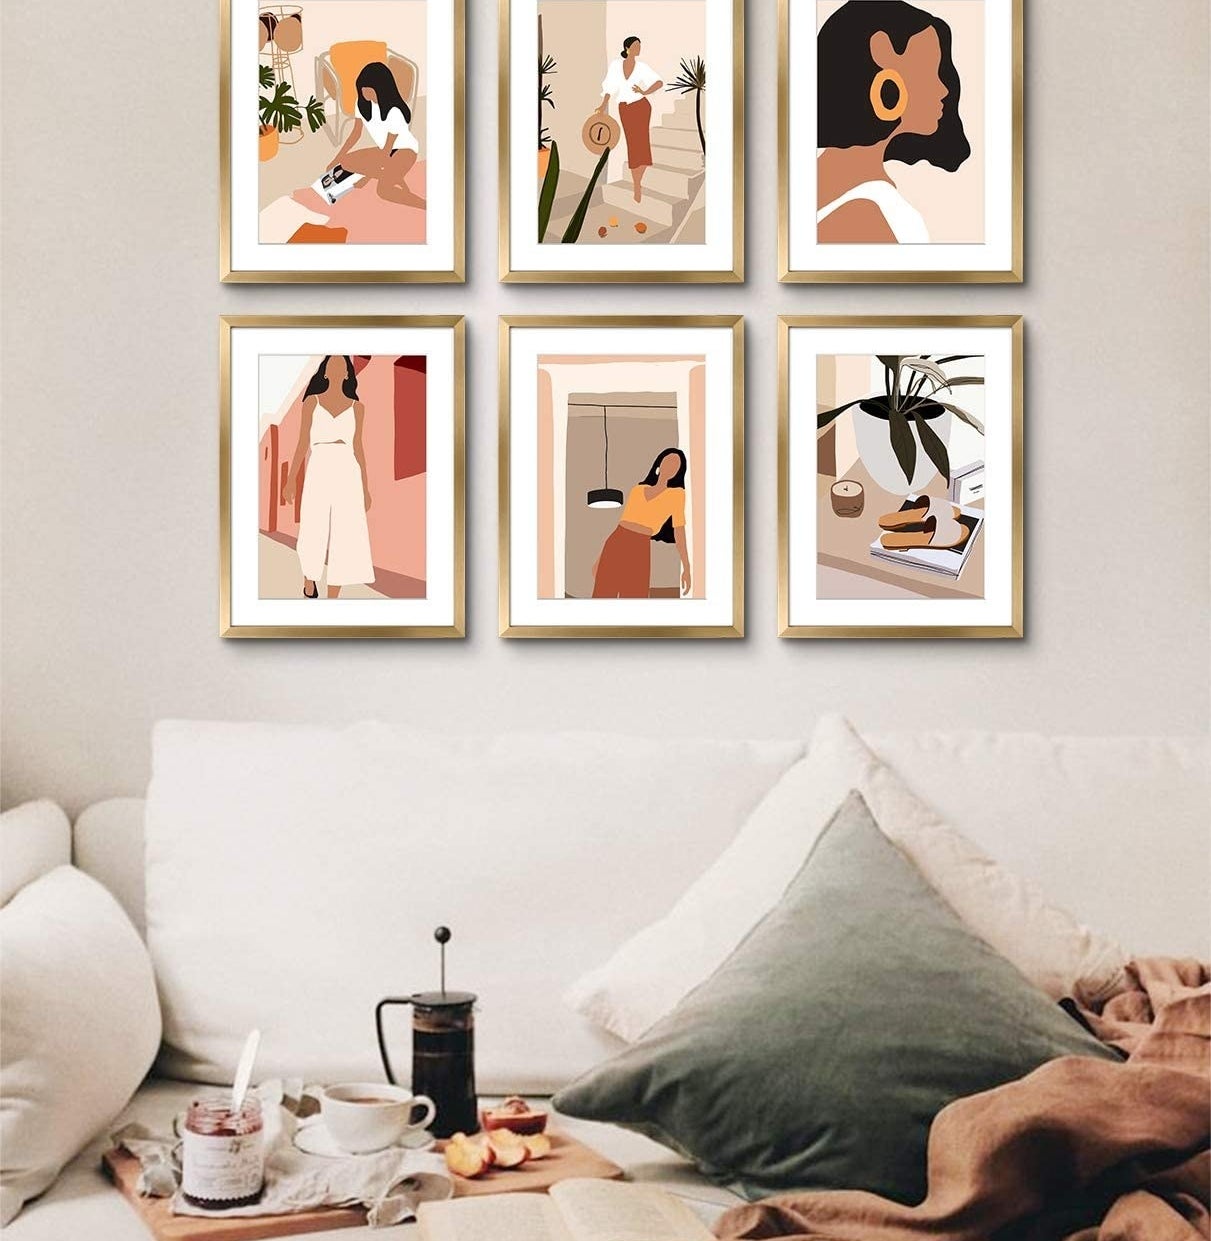 The six framed art prints on a wall above a couch